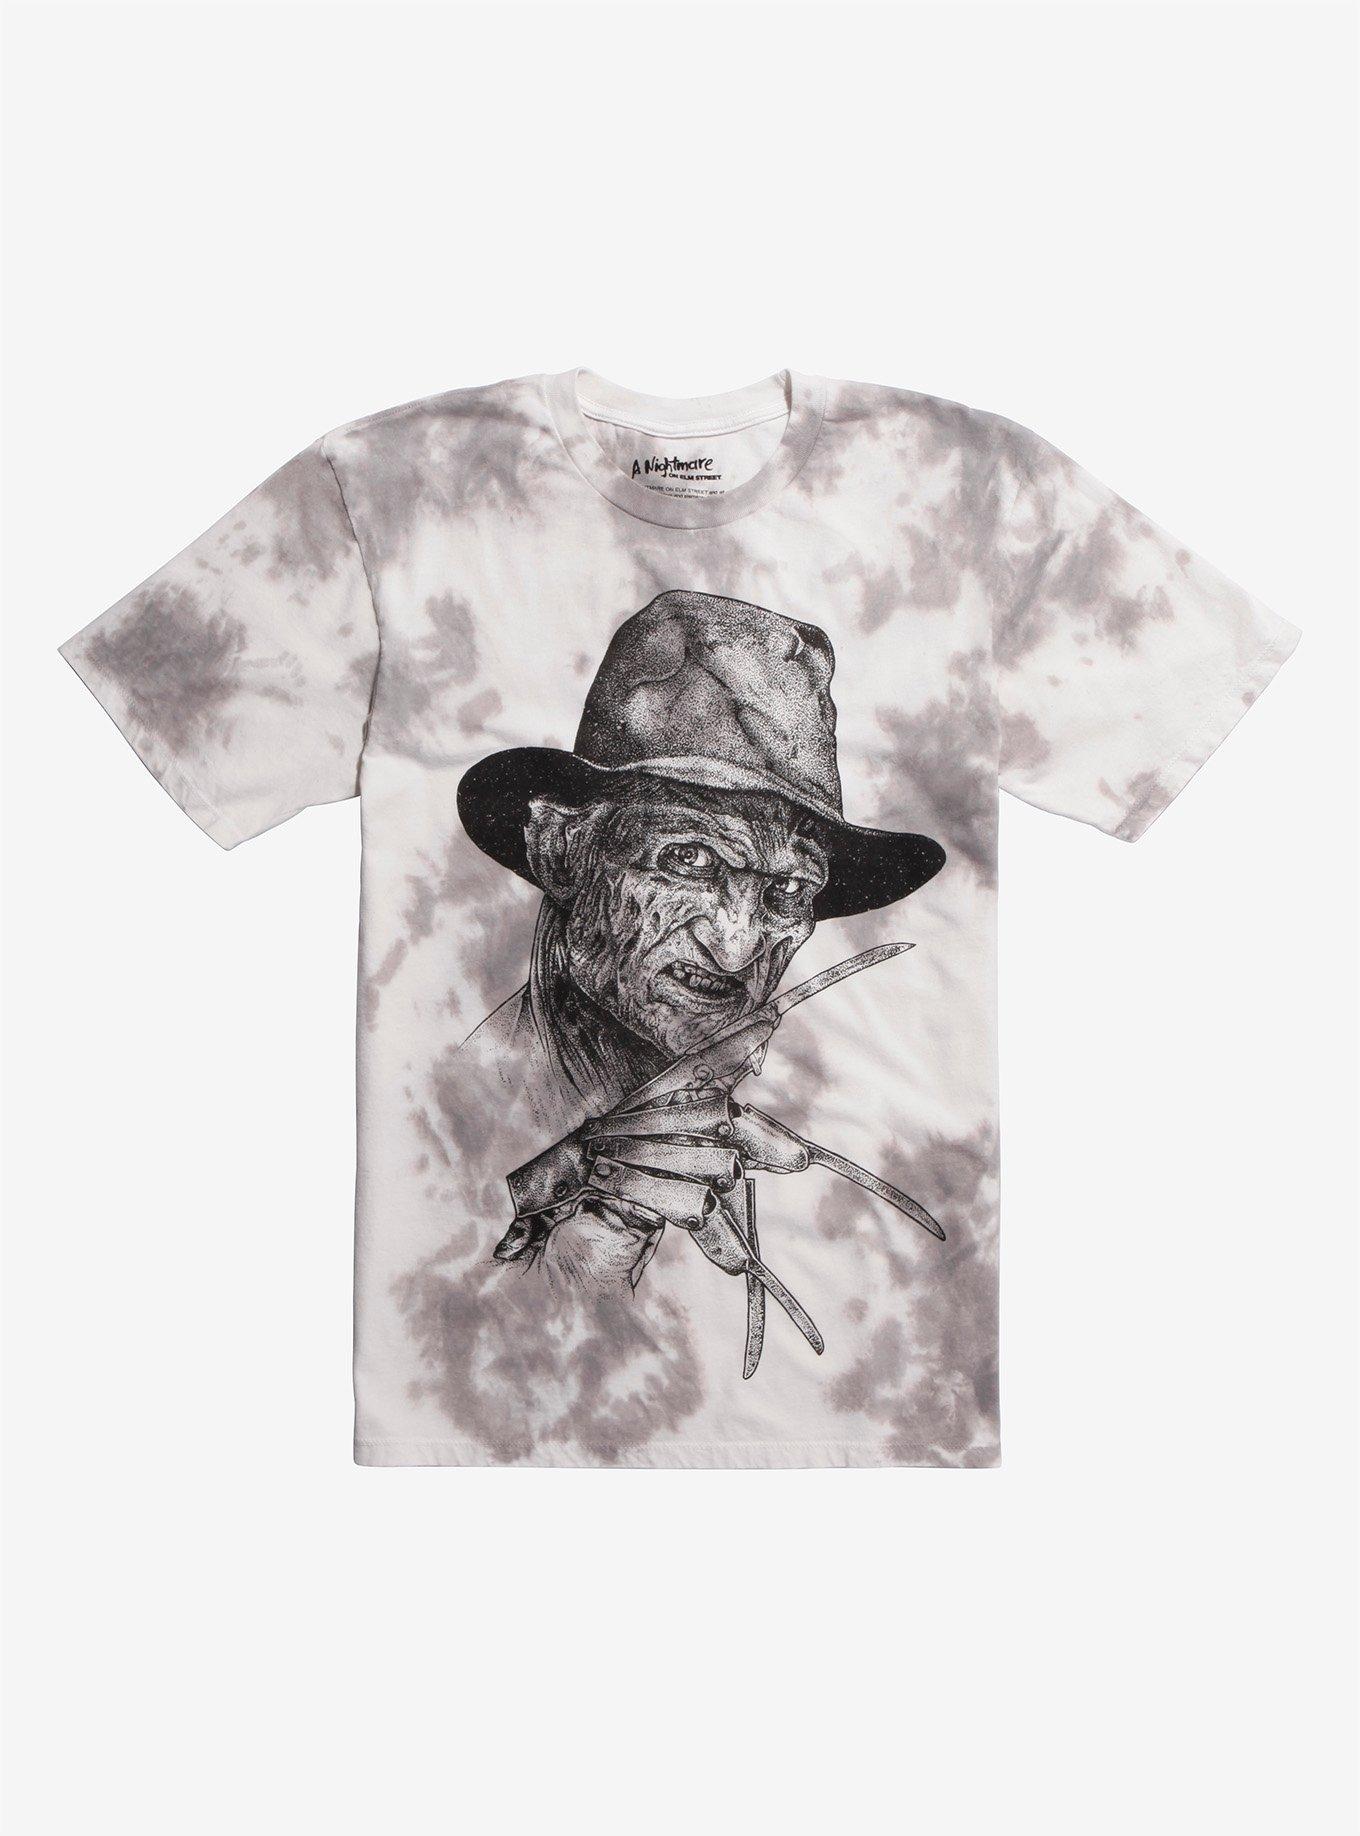 A Nightmare On Elm Street A Dream A Nightmare Wash T-Shirt Hot Topic Exclusive, GREY, hi-res